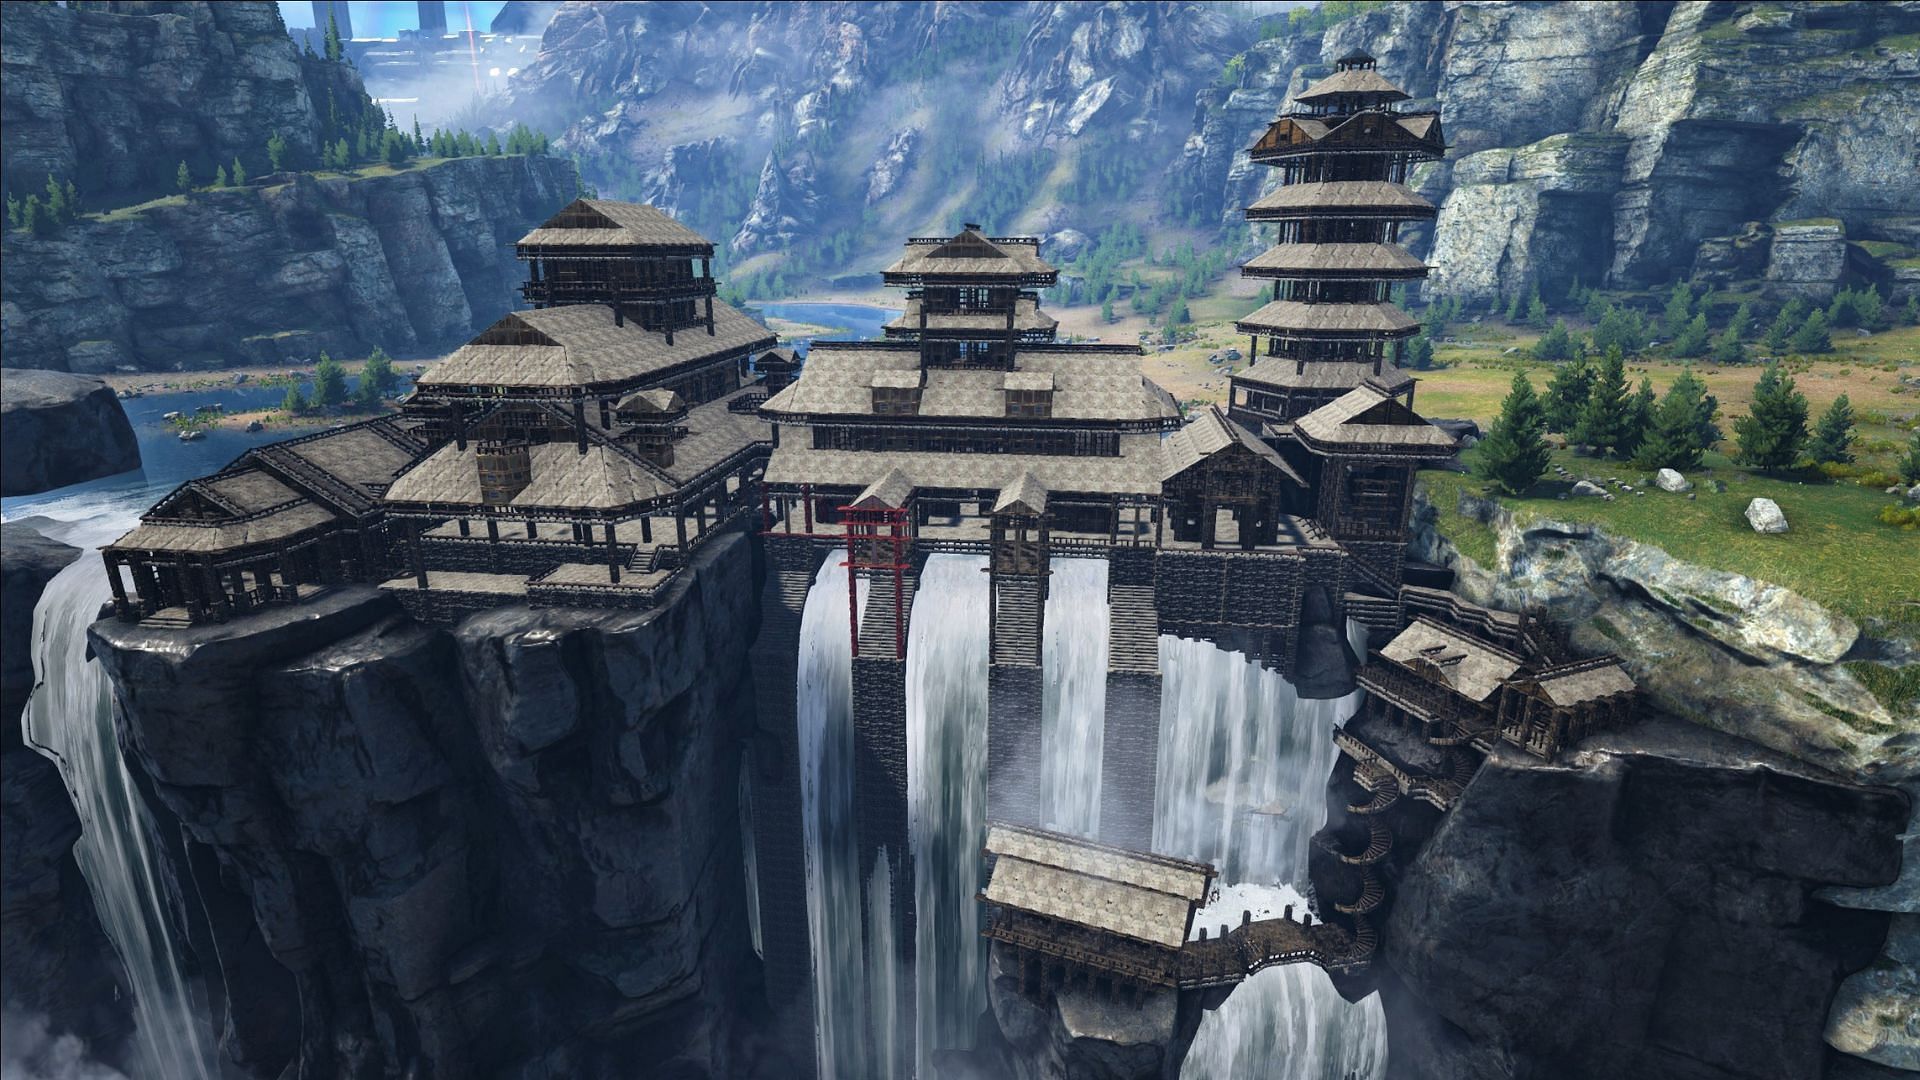 Waterfall base is one of the best base buildings in the game (Image via Studio Wildcard)